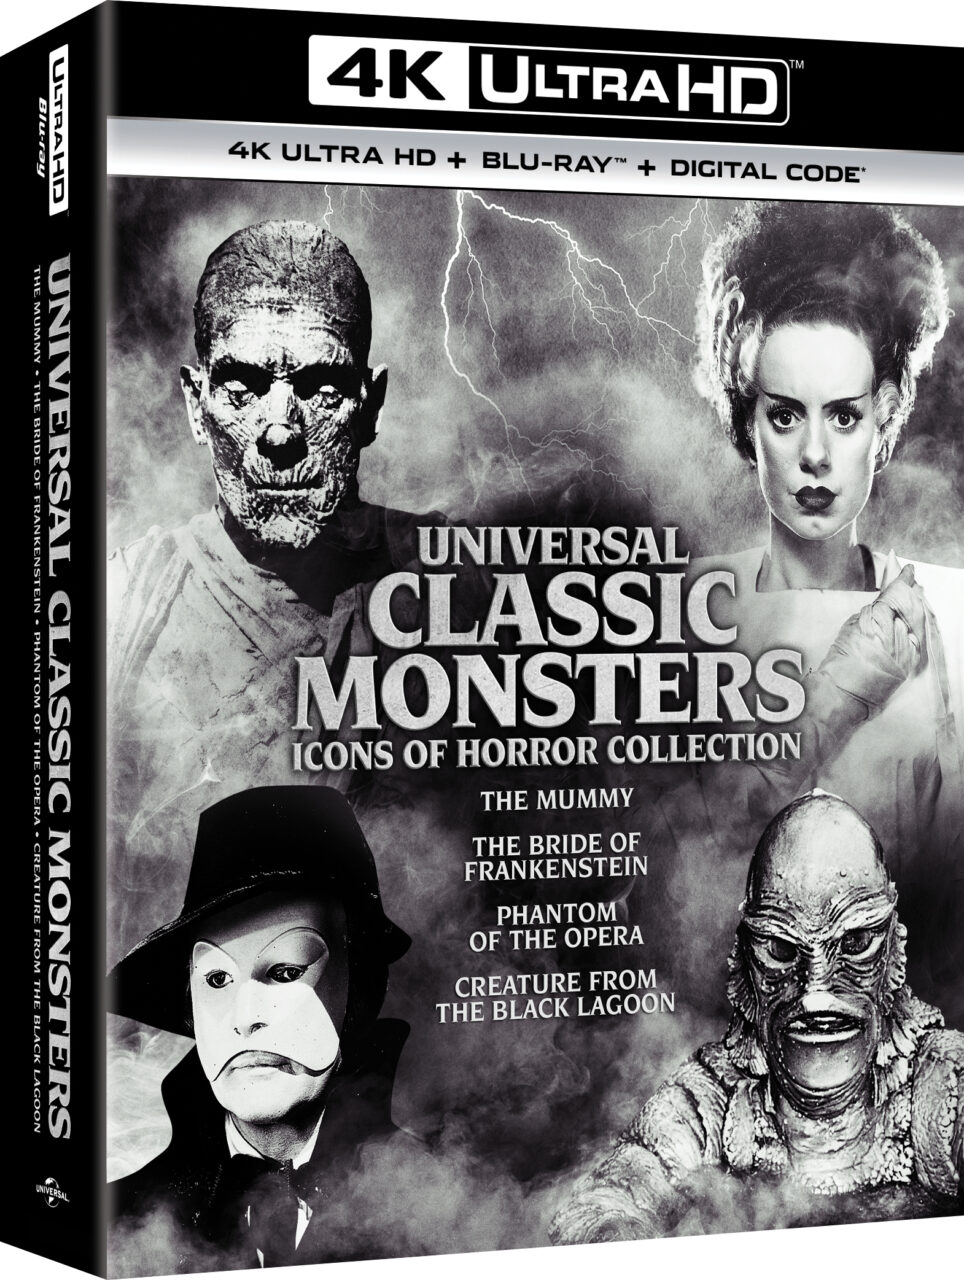 Universal Classic Monsters: Icons Of Horror Collection Vol. 2 4K Ultra HD Combo Pack cover (Universal Pictures Home Entertainment)